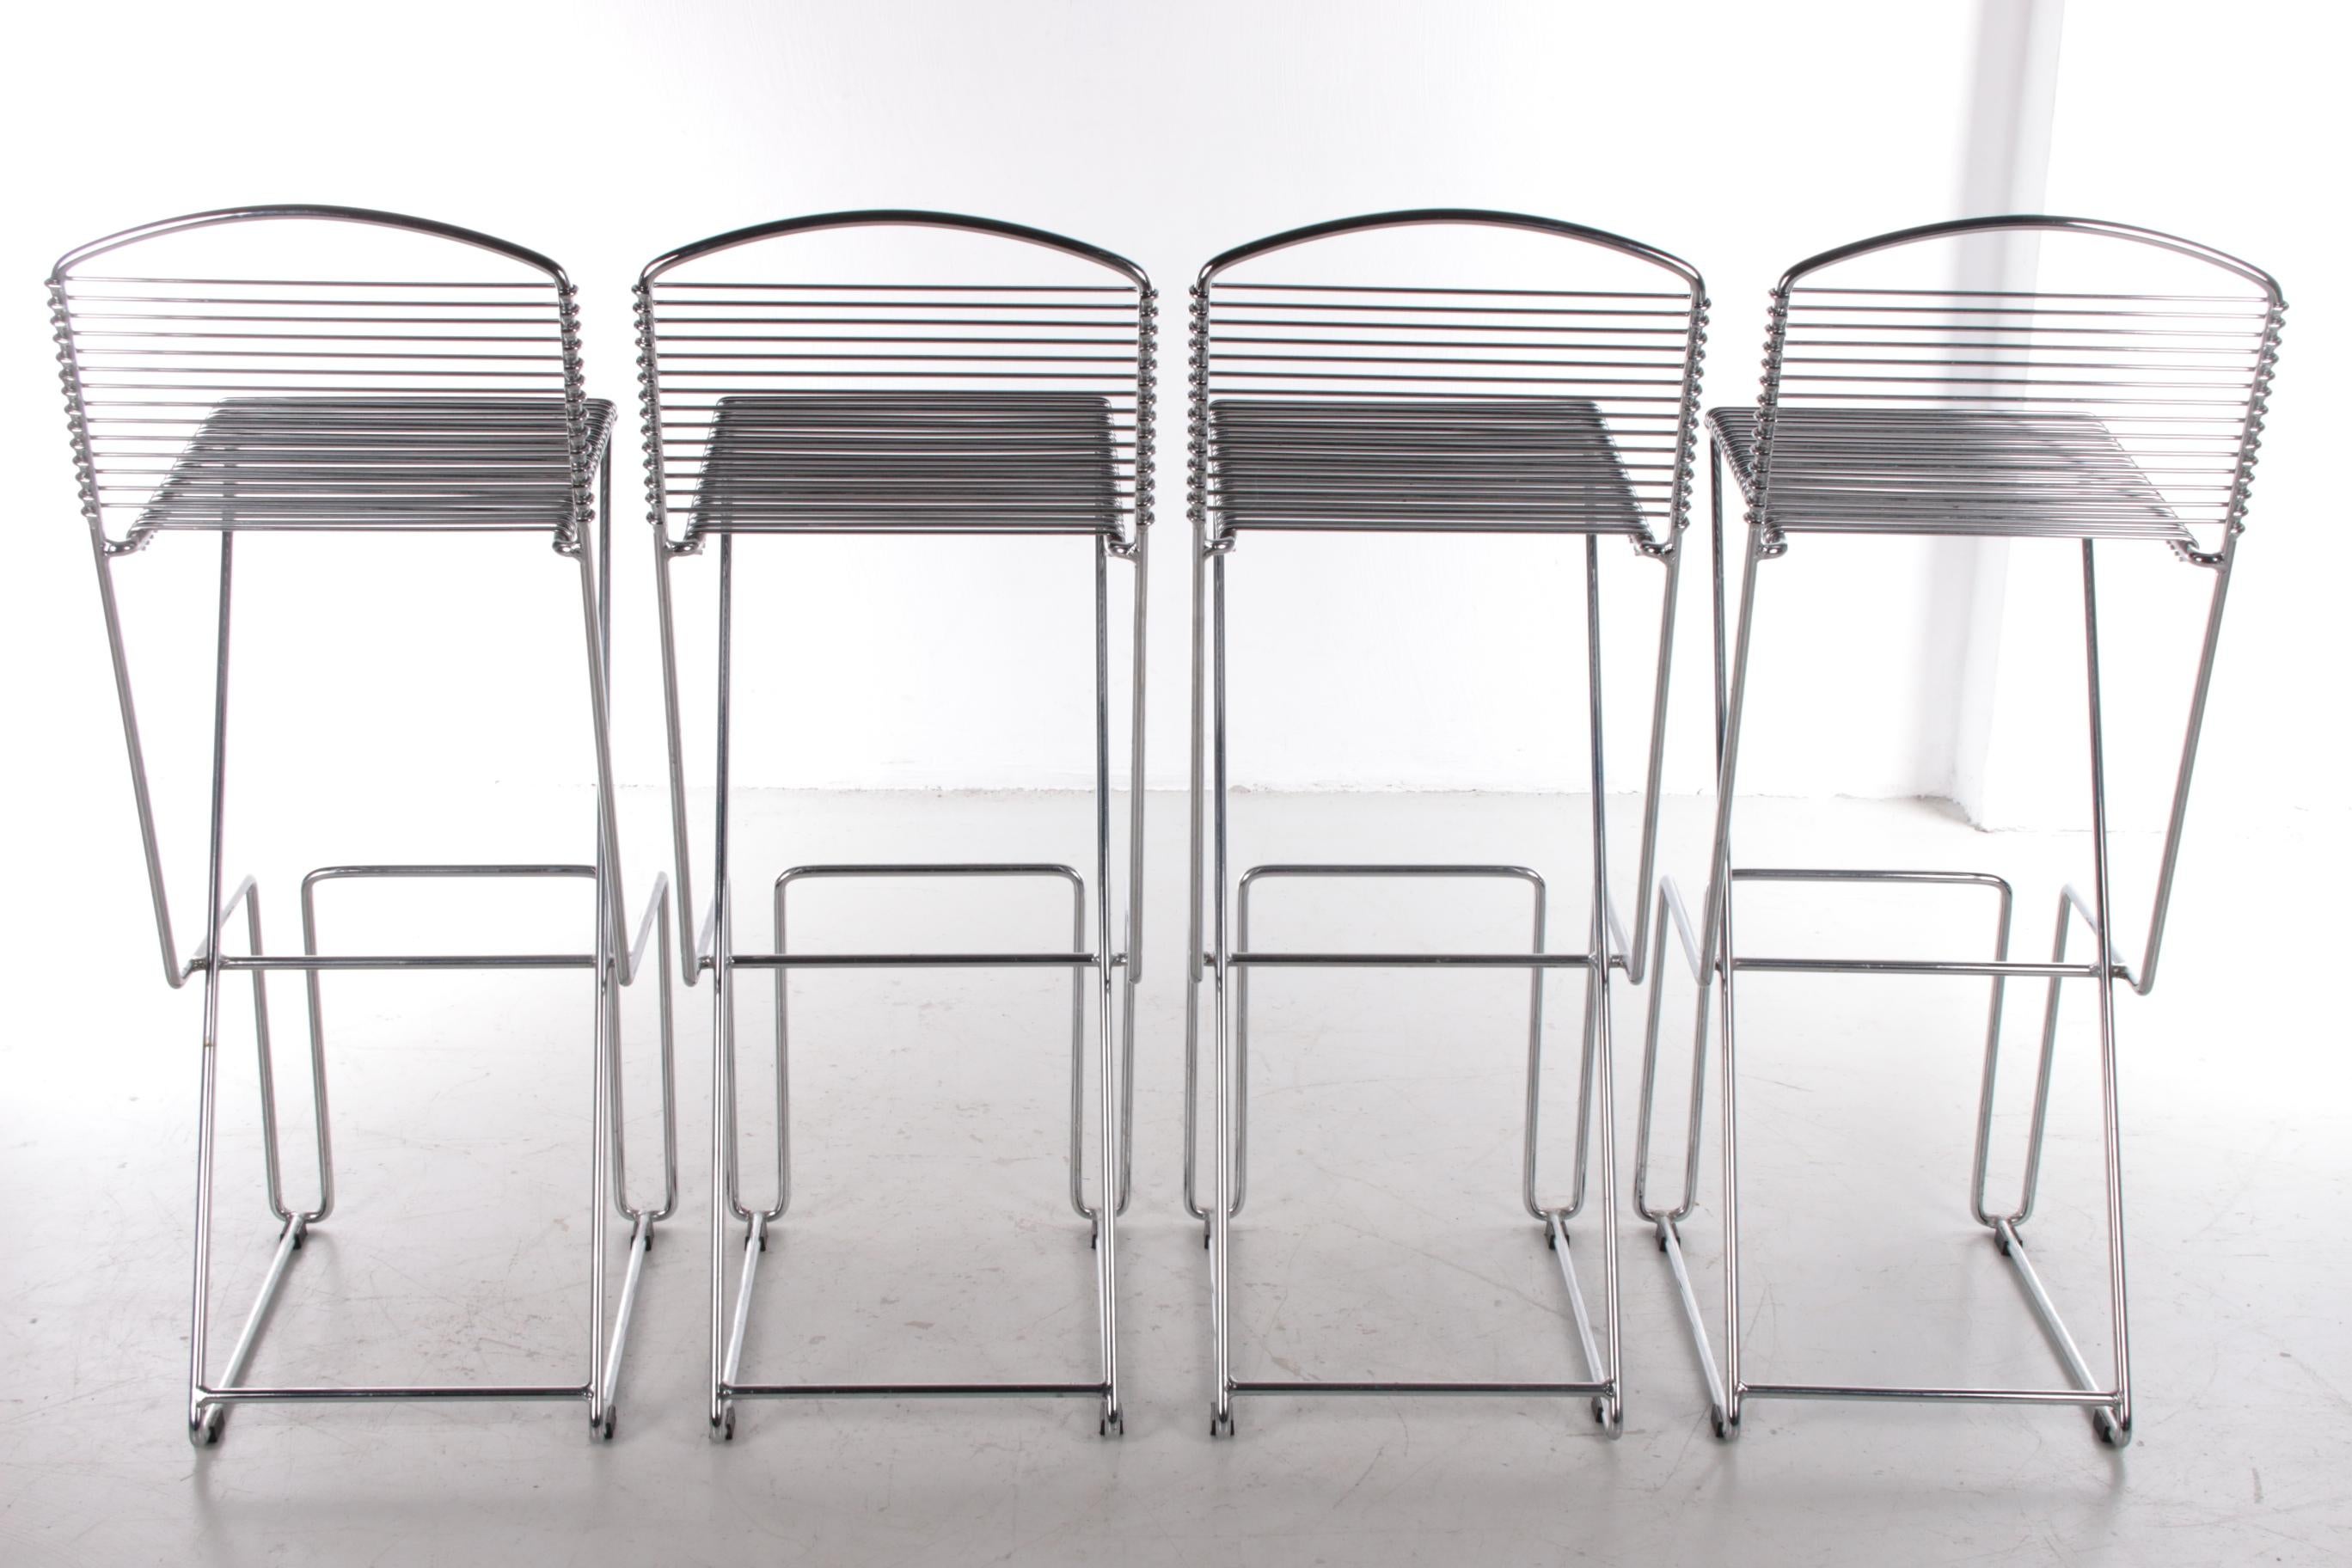 Steel Set of 4 Bar Stools by Till Behrens by Schlubach, 1980